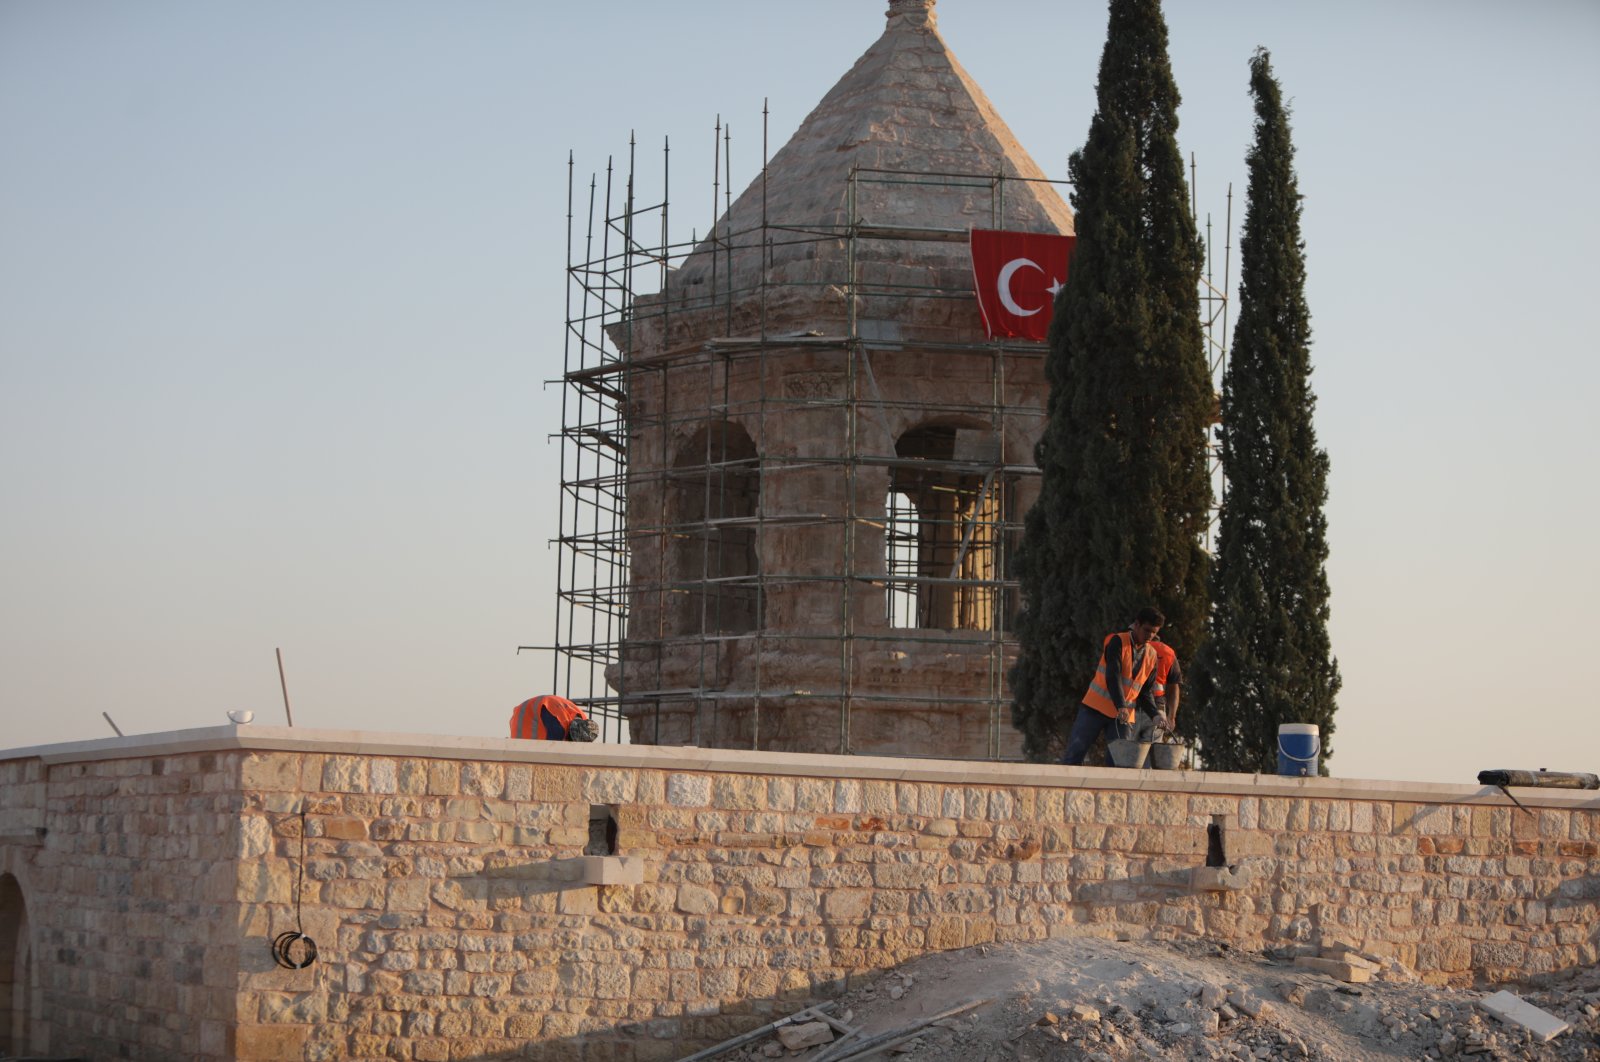 Turkey's Regional Directorate of Foundations renovates a historical site damaged by the YPG/PKK terrorist group in the northern Afrin province, Syria, Aug. 12, 2020 (AA Photo)